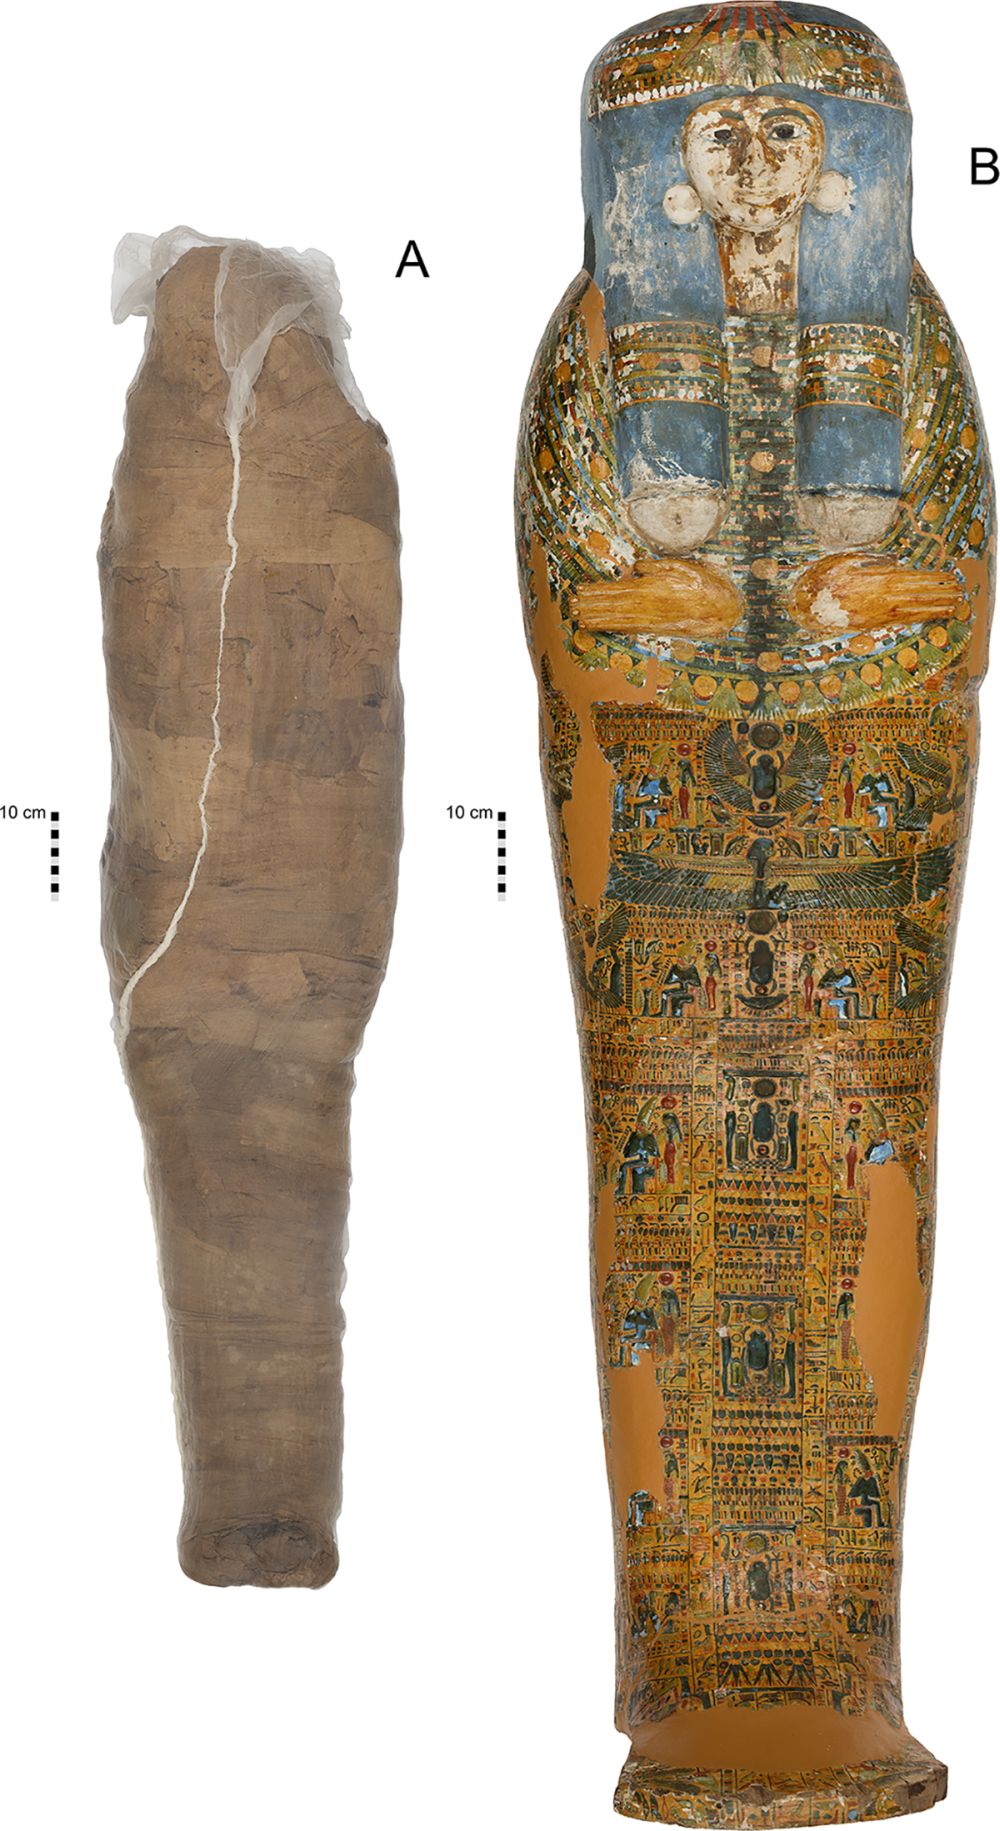 The mummified individual and coffin.  (Image: K. Sowada et al,, 2021/PLOS ONE)